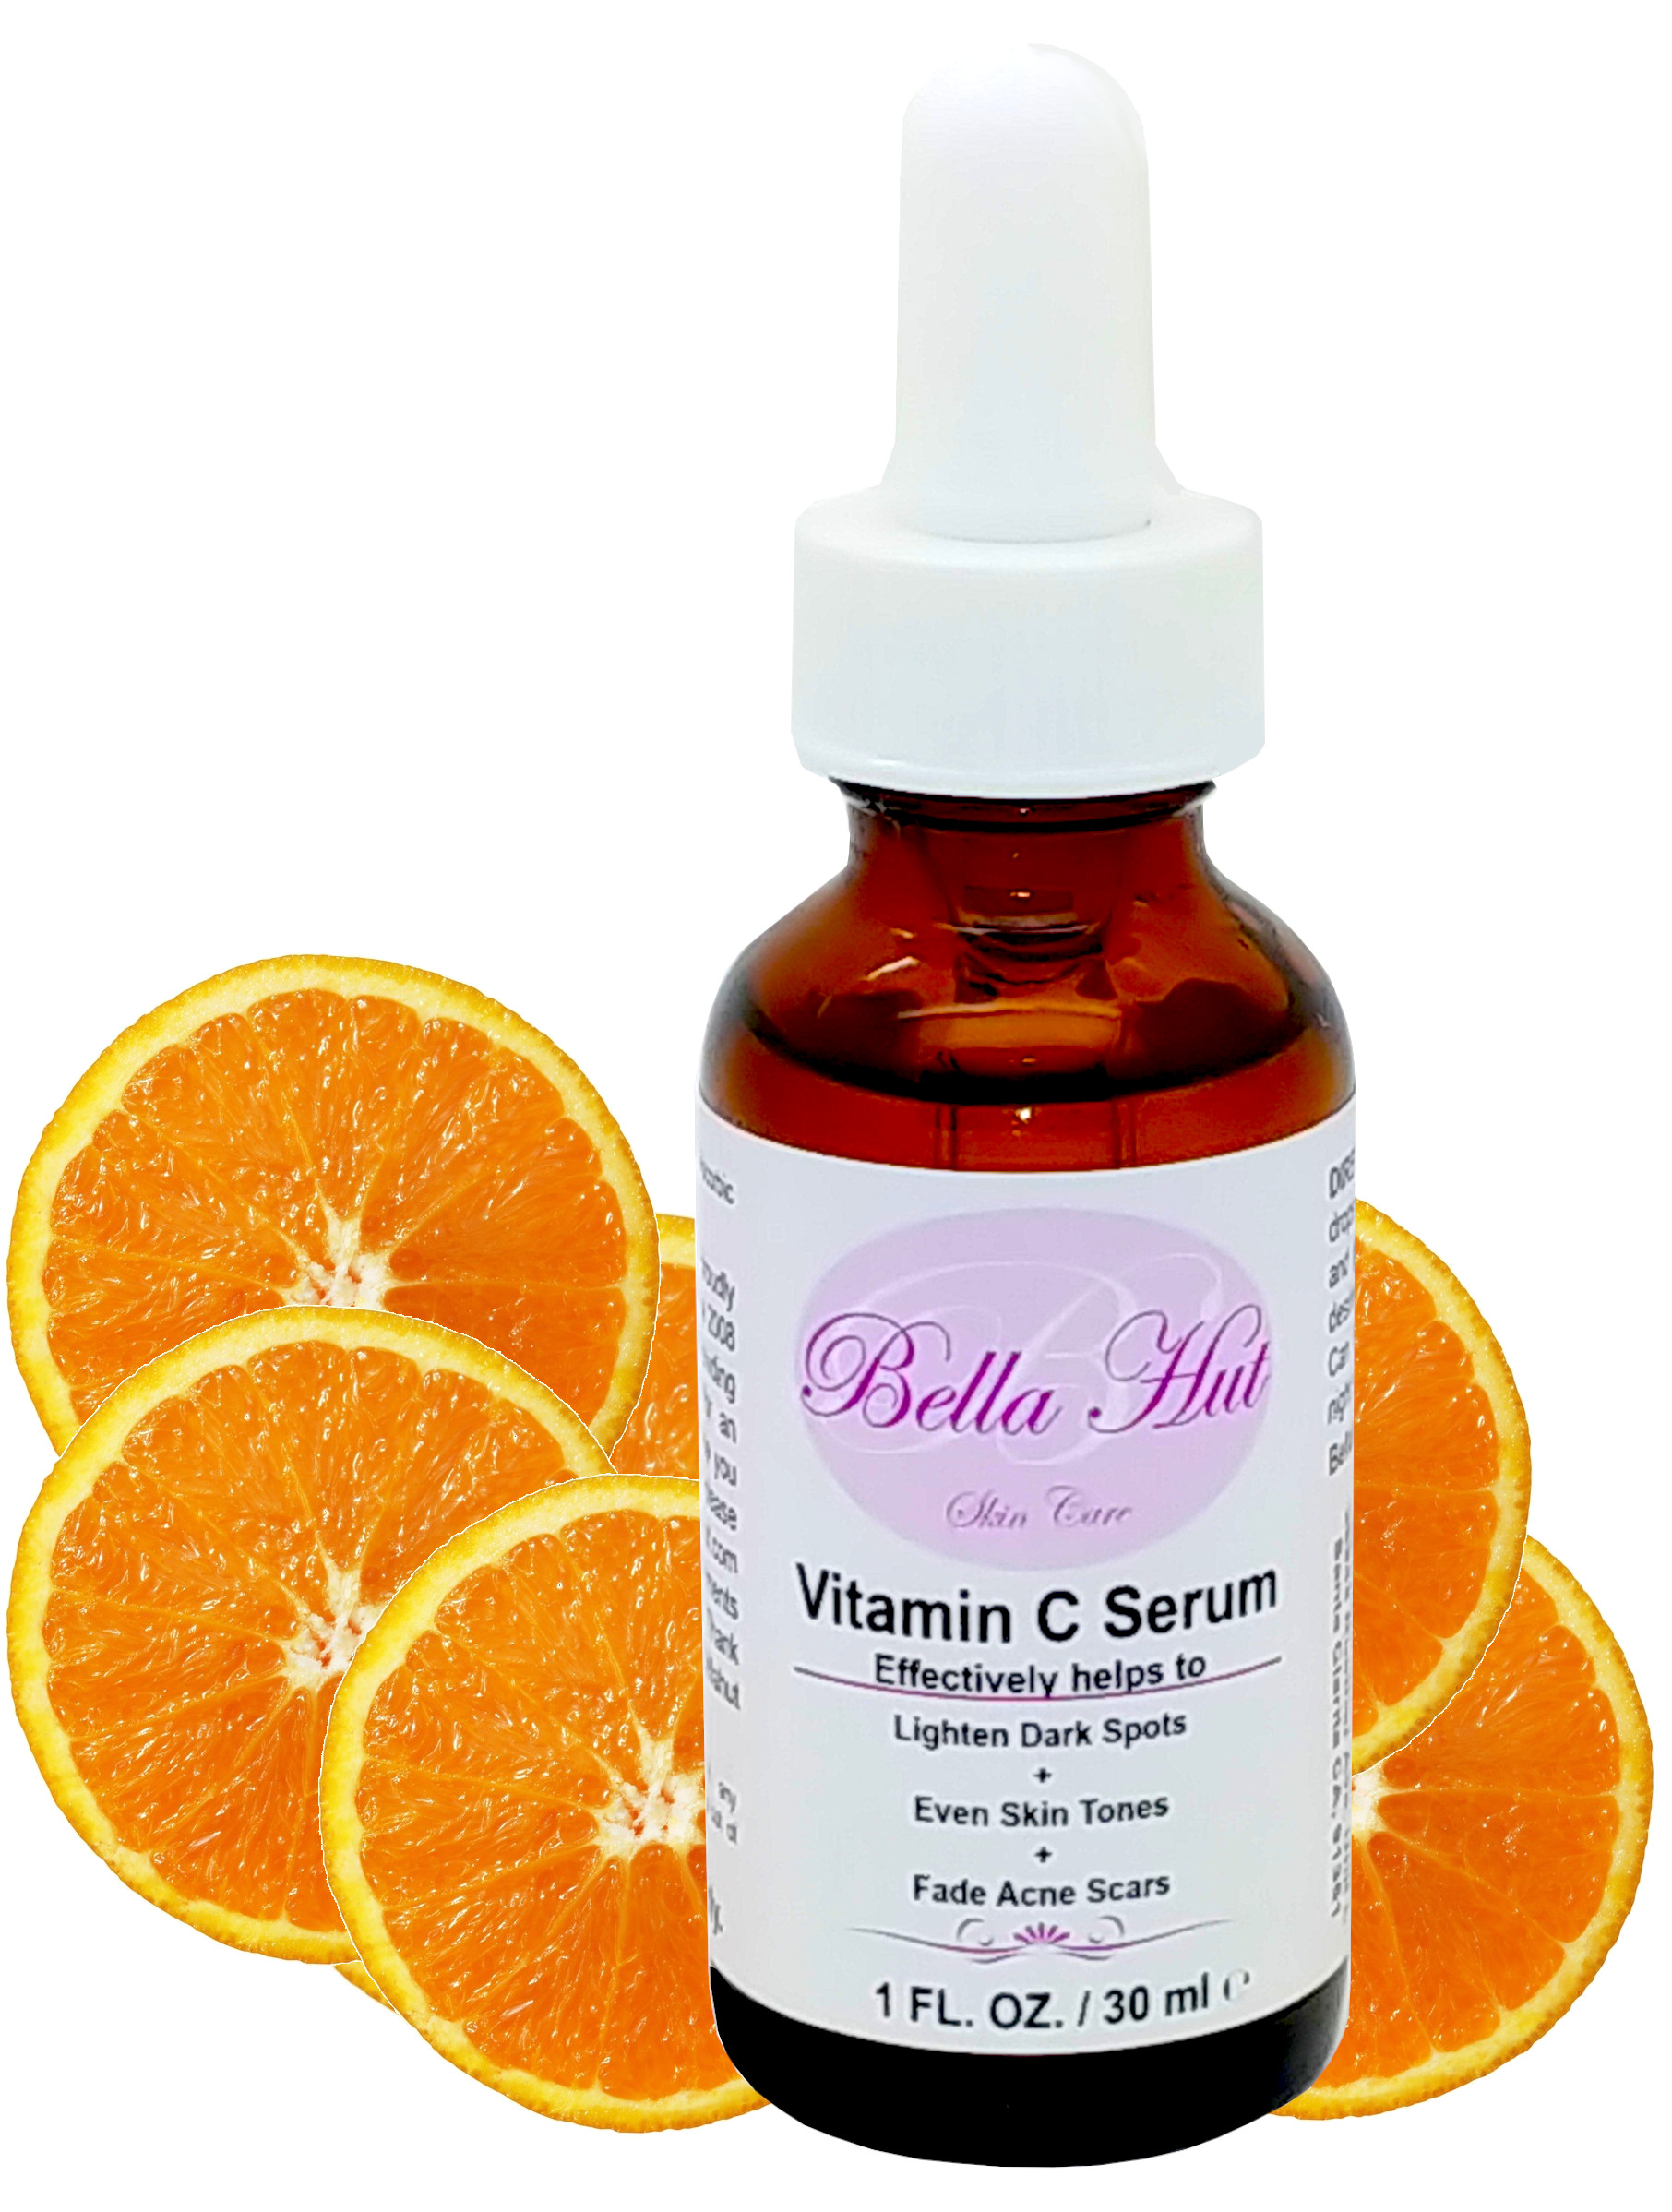 Vitamin C Serum with 20% Vitamin C concentration for Age spots, liver spots and even skin tone